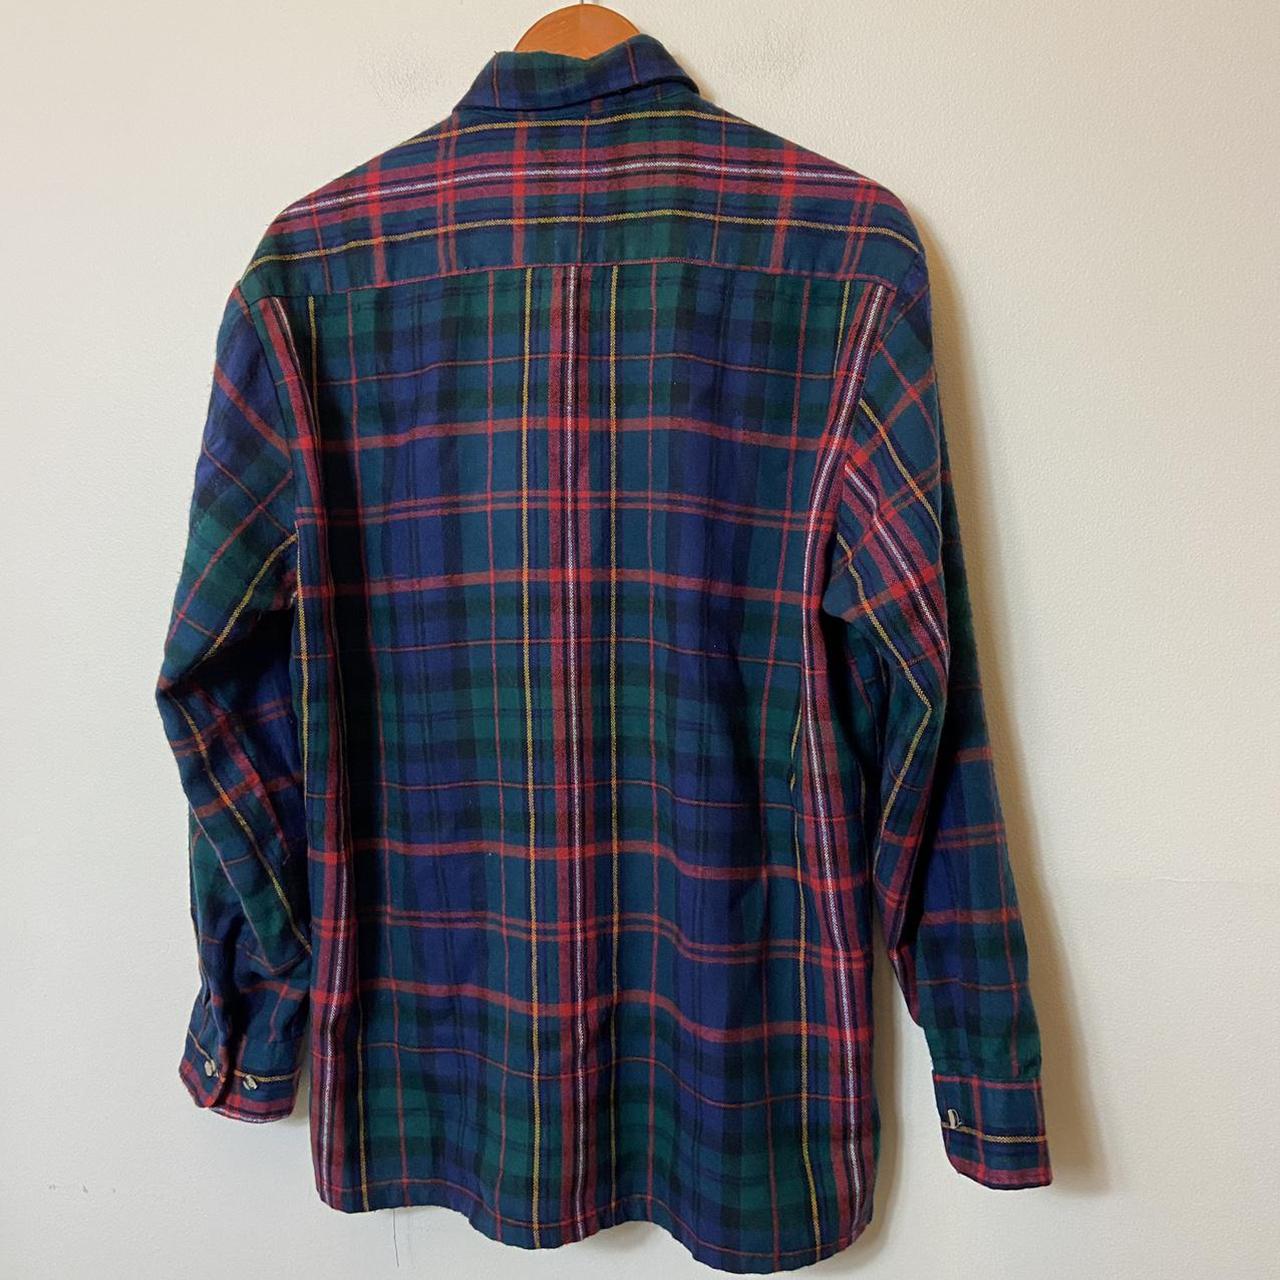 Product Image 3 - VINTAGE 1980s 1990s FLANNEL SHIRT